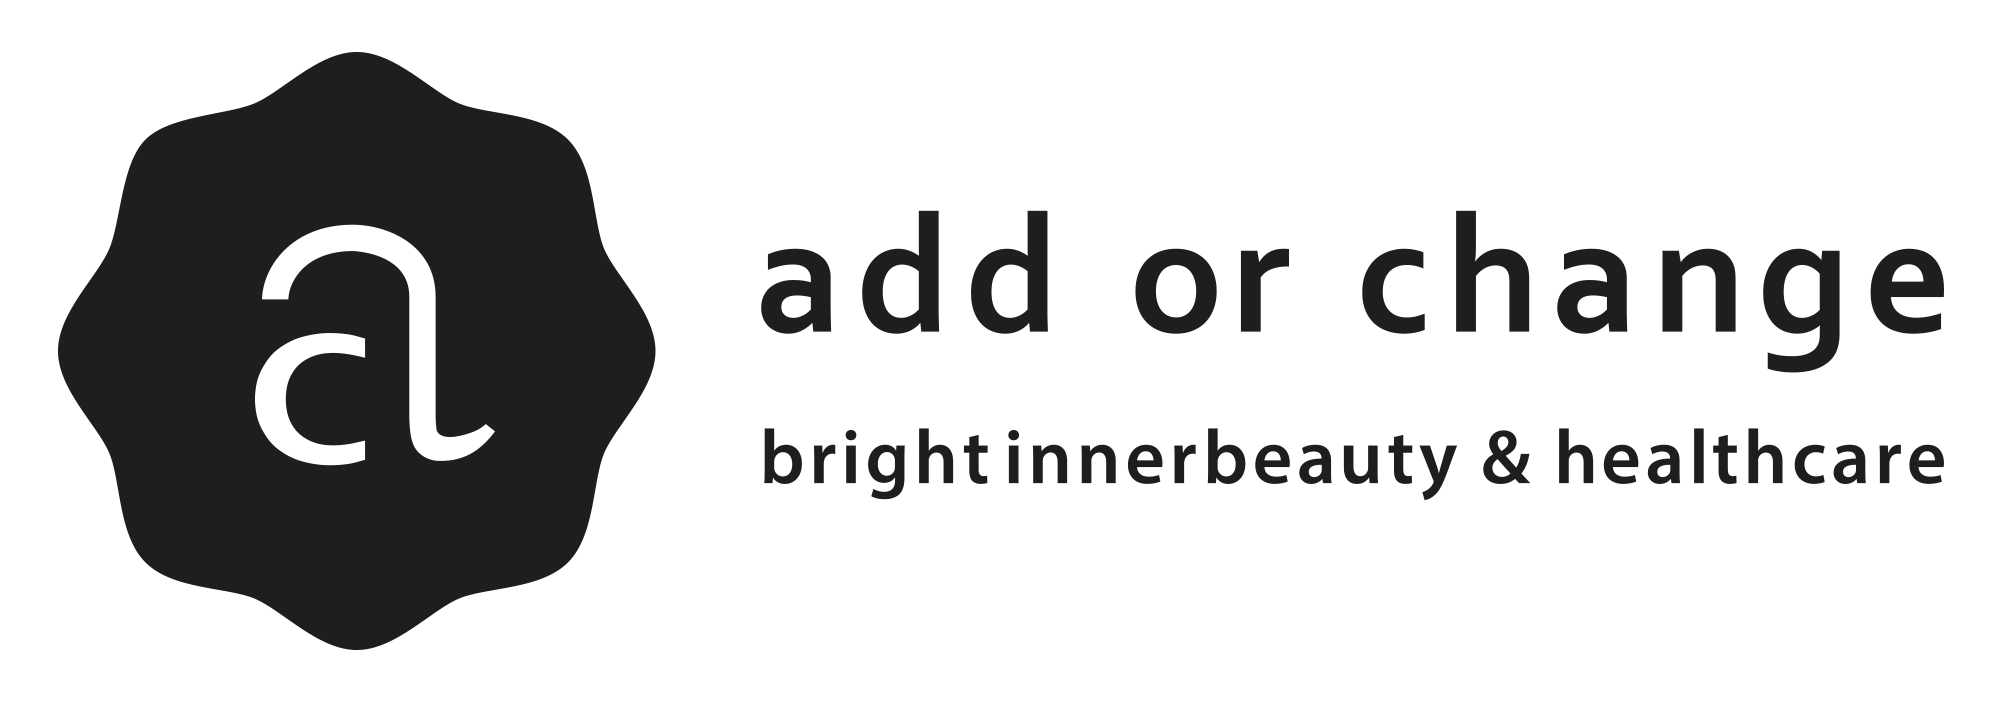 add or change -bright innerbeauty & healthcare-